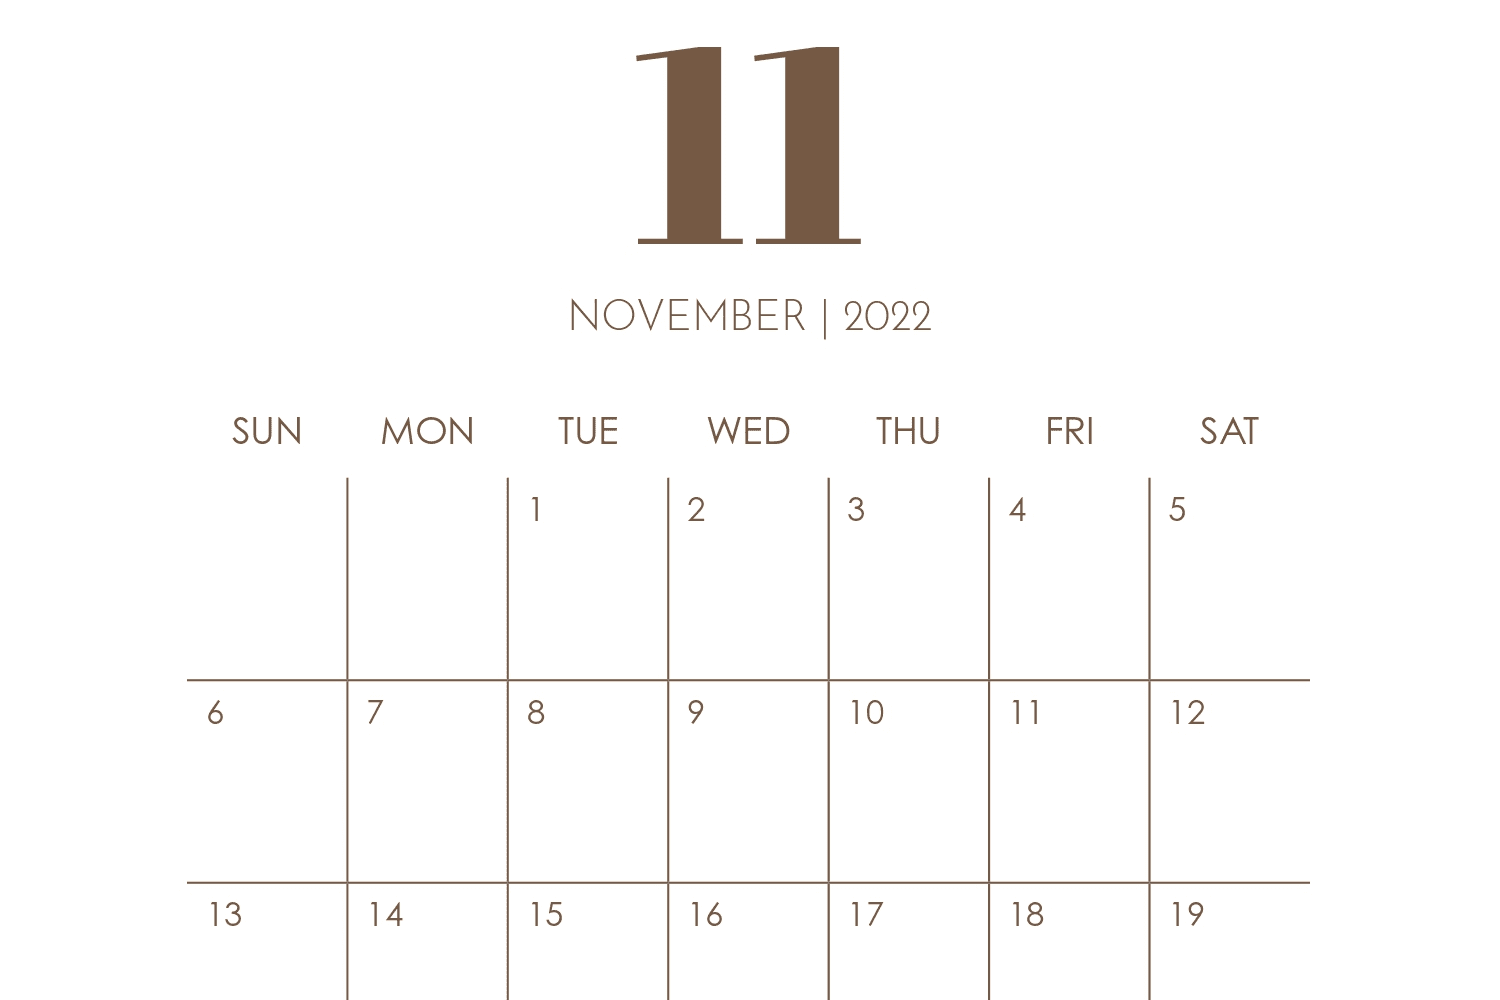 November calendar with white background and brown lines separating dates.